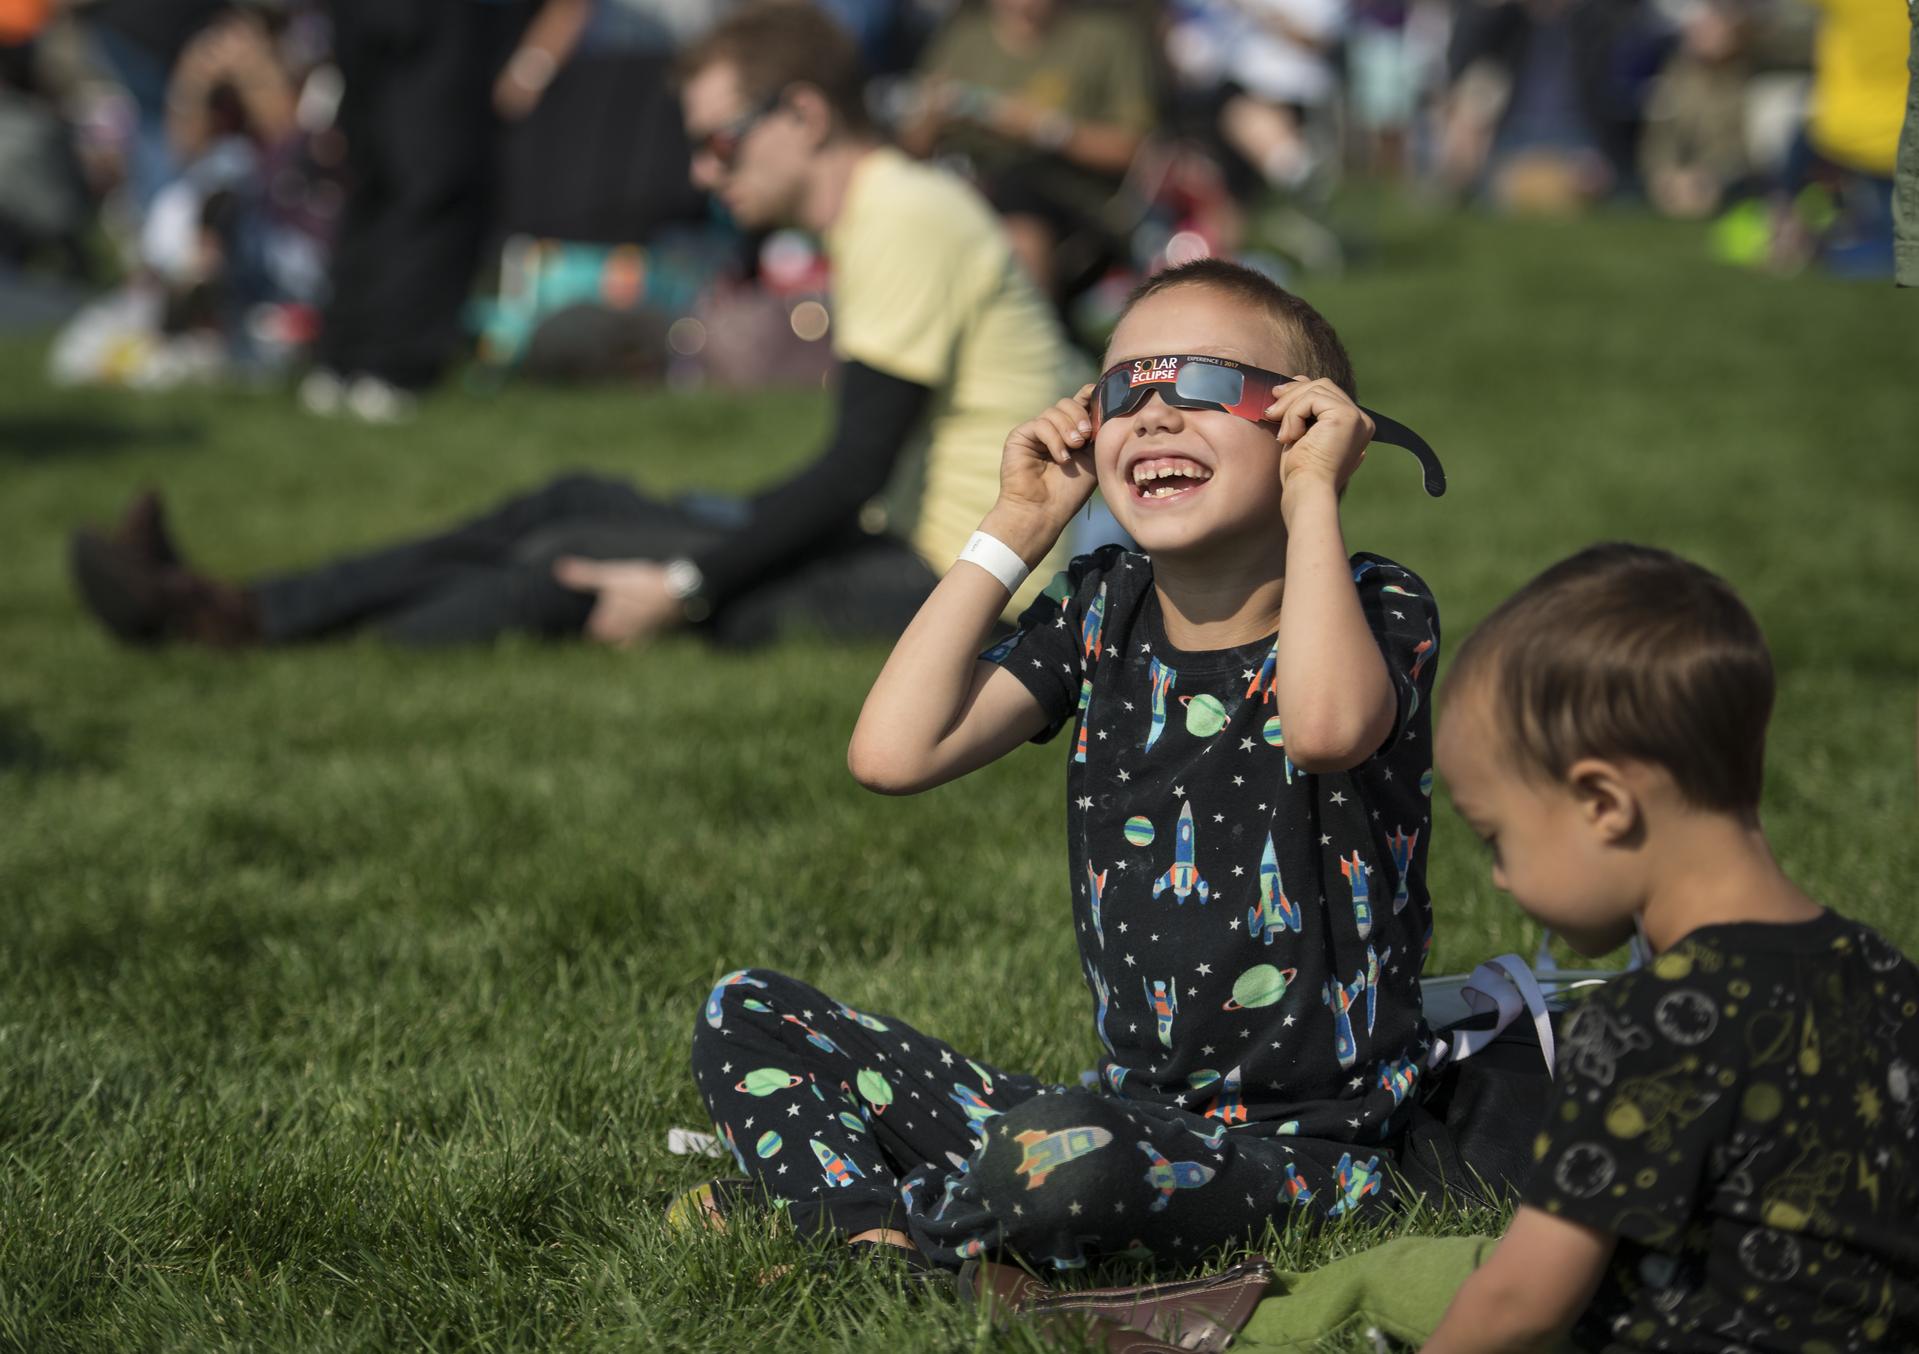 A boy watches the total solar eclipse through protective glasses in Madras, Oregon on Monday, Aug. 21, 2017. A total solar eclipse swept across a narrow portion of the contiguous United States from Lincoln Beach, Oregon to Charleston, South Carolina. A partial solar eclipse was visible across the entire North American continent along with parts of South America, Africa, and Europe. Photo